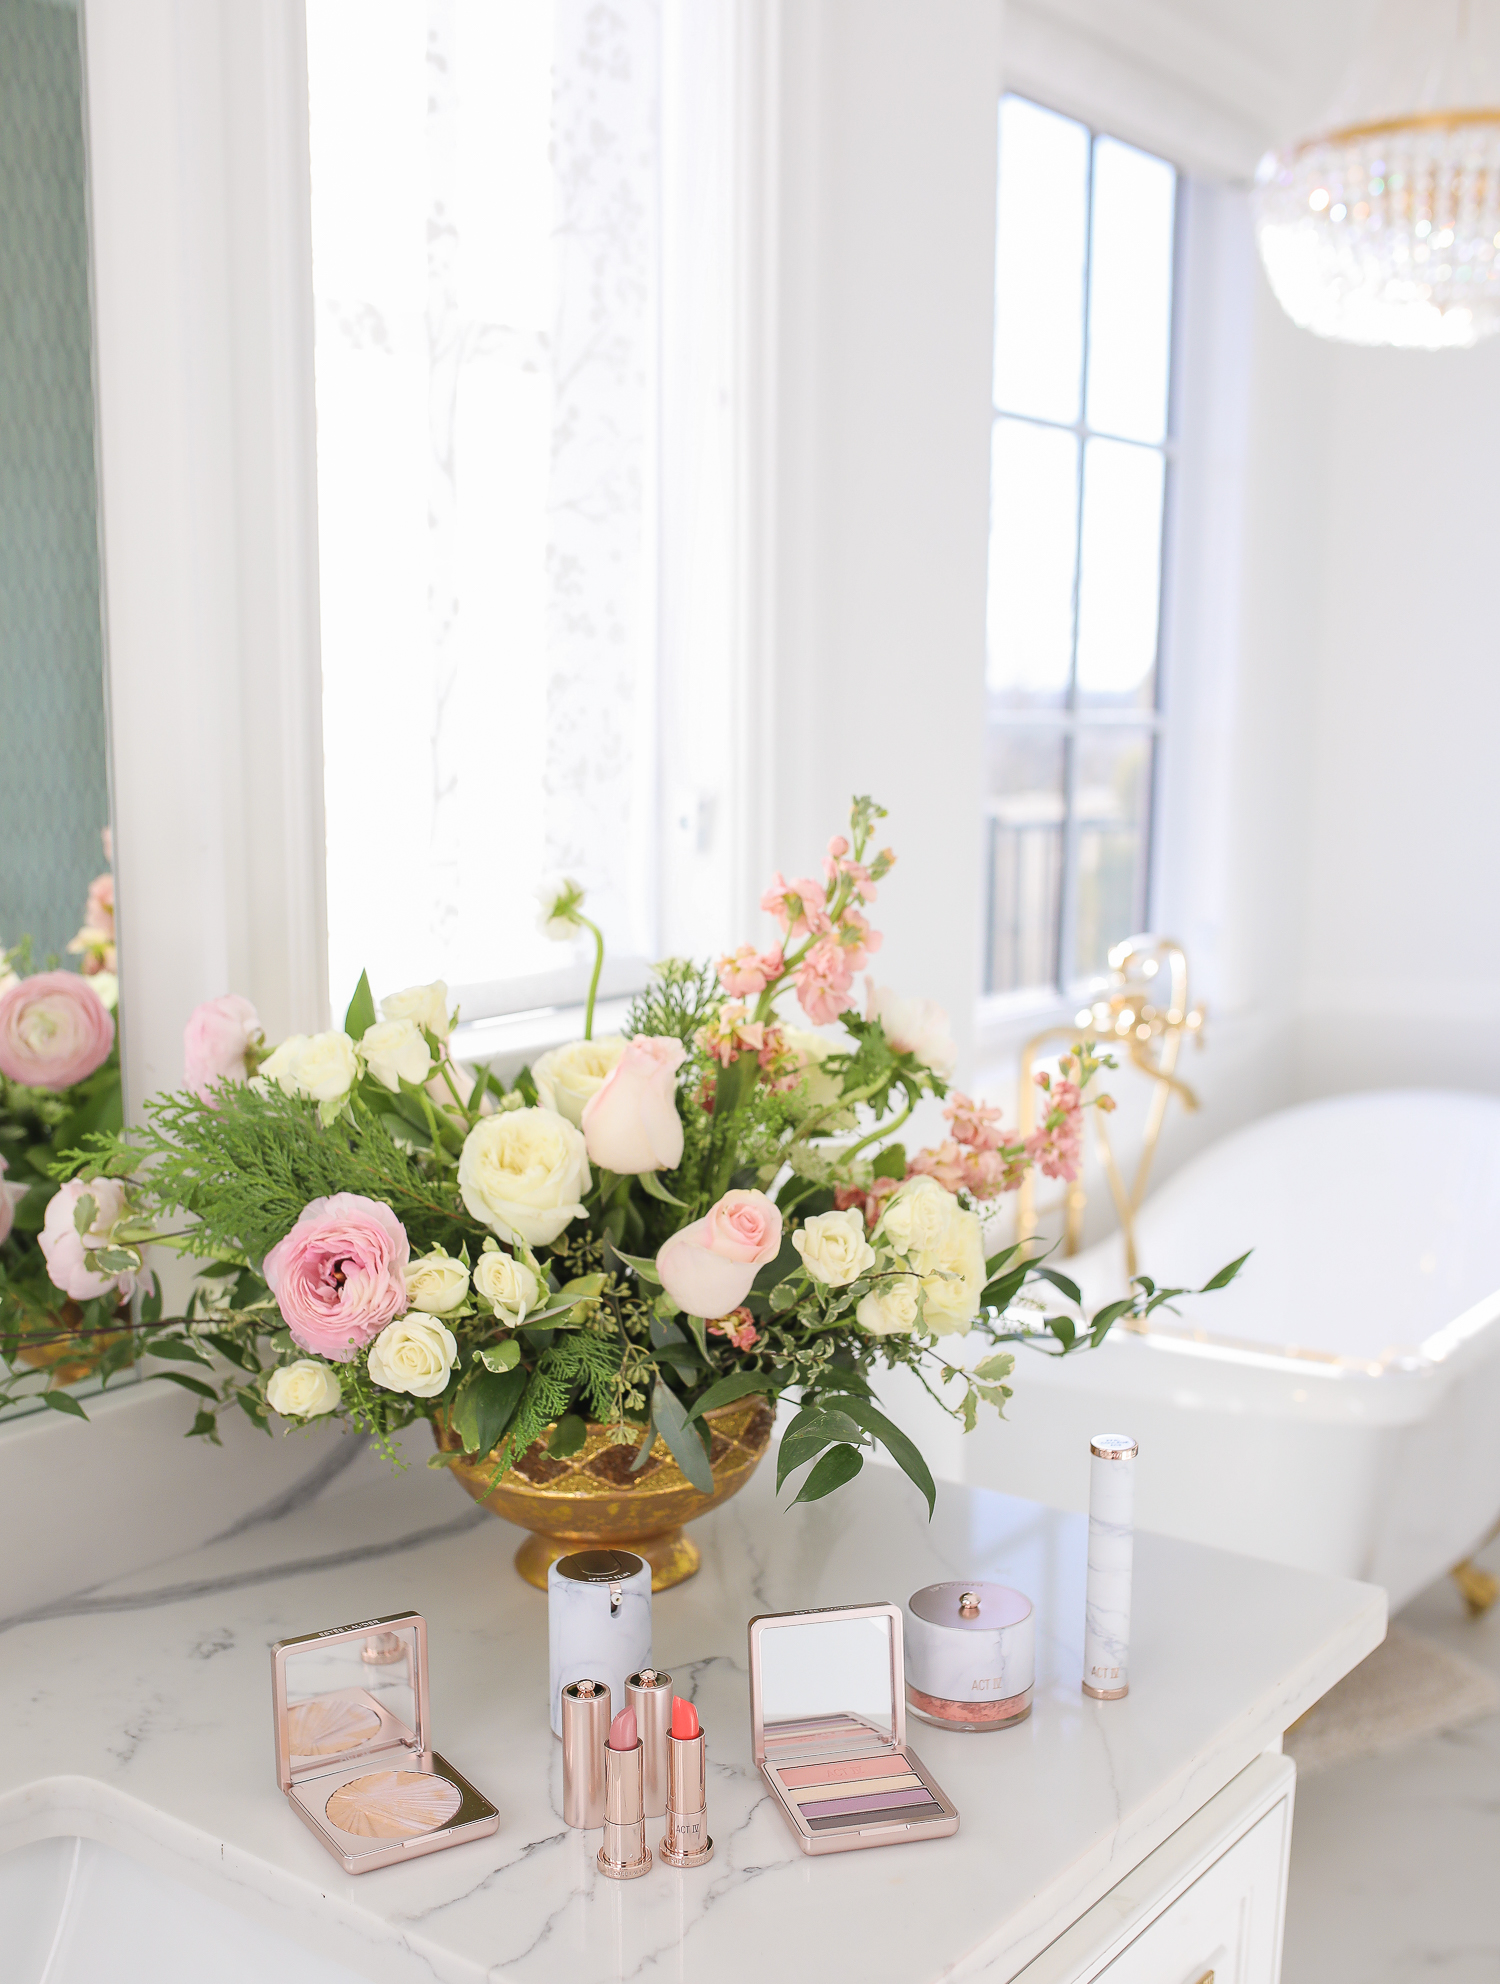 Estee Lauder Makeup by popular US beauty blog, The Sweetest Thing: image of various Estee Lauder Act IV makeup products on a bathroom counter next to a vase of flowers. 